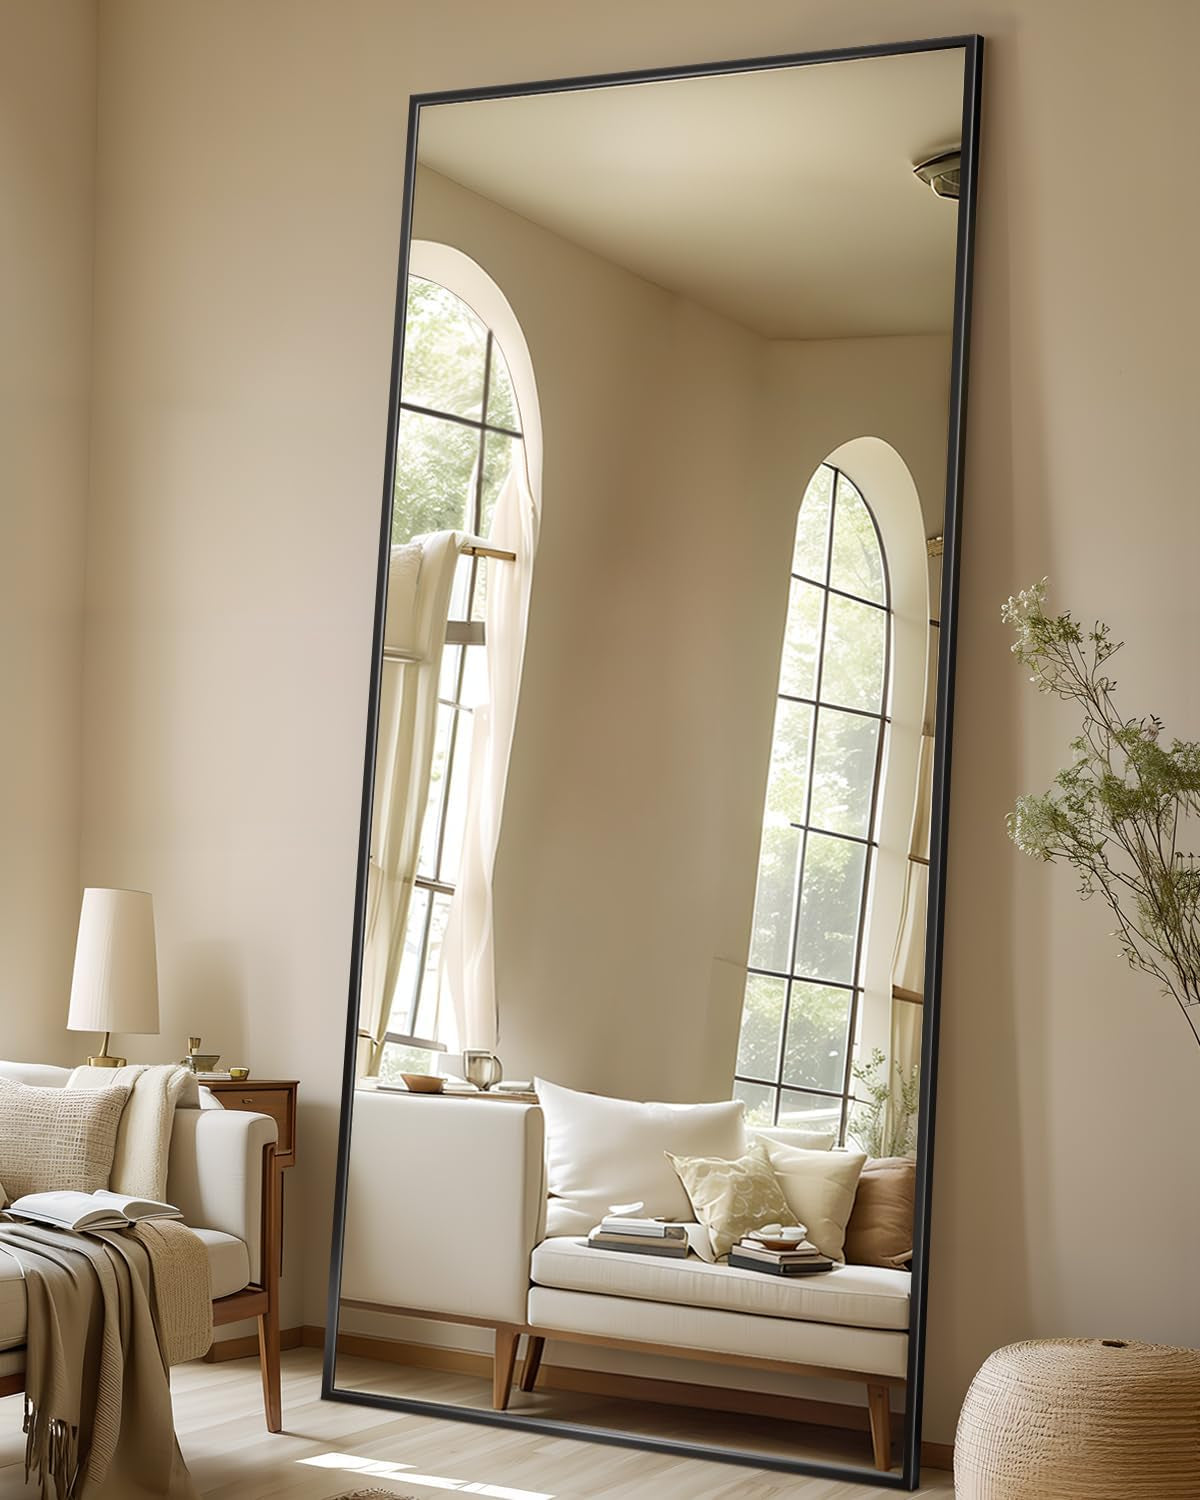 71"X28" Full Length Mirror, Floor Mirror, Full Length Mirror with Stand, Full Body Floor Mirror Bedroom Wall Mirror, Large Mirror, Leaning, Standing or Hanging Horizontally/Vertically, Black - Design By Technique